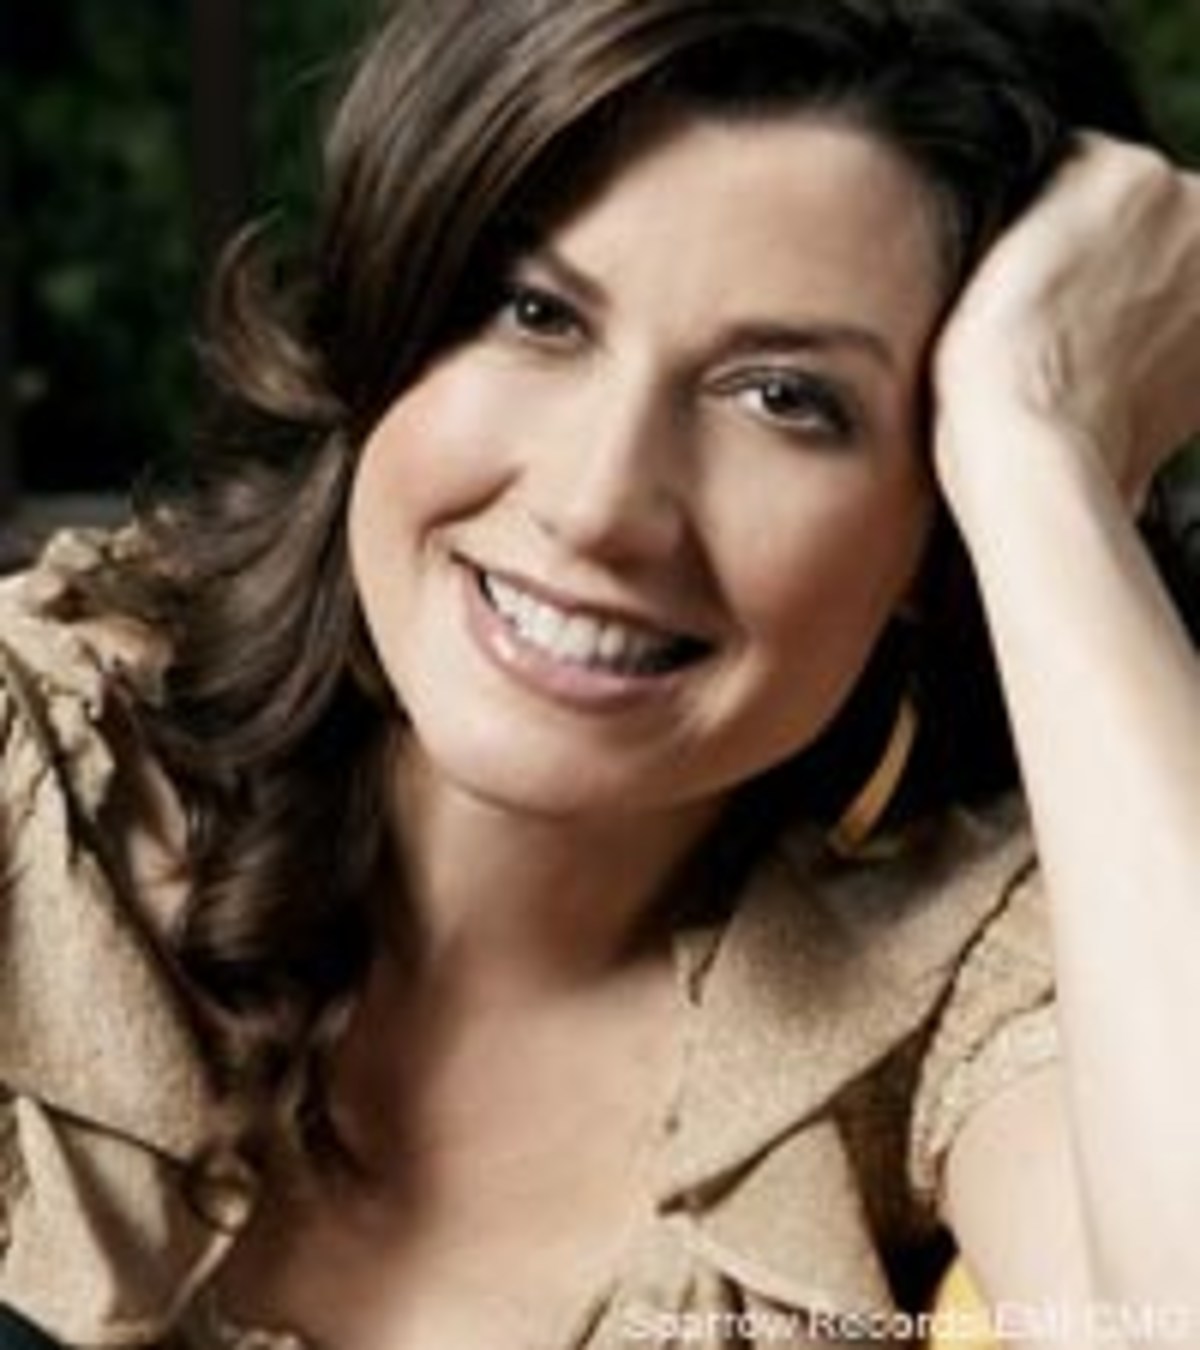 Amy Grant Shares Personal Journey on New Album